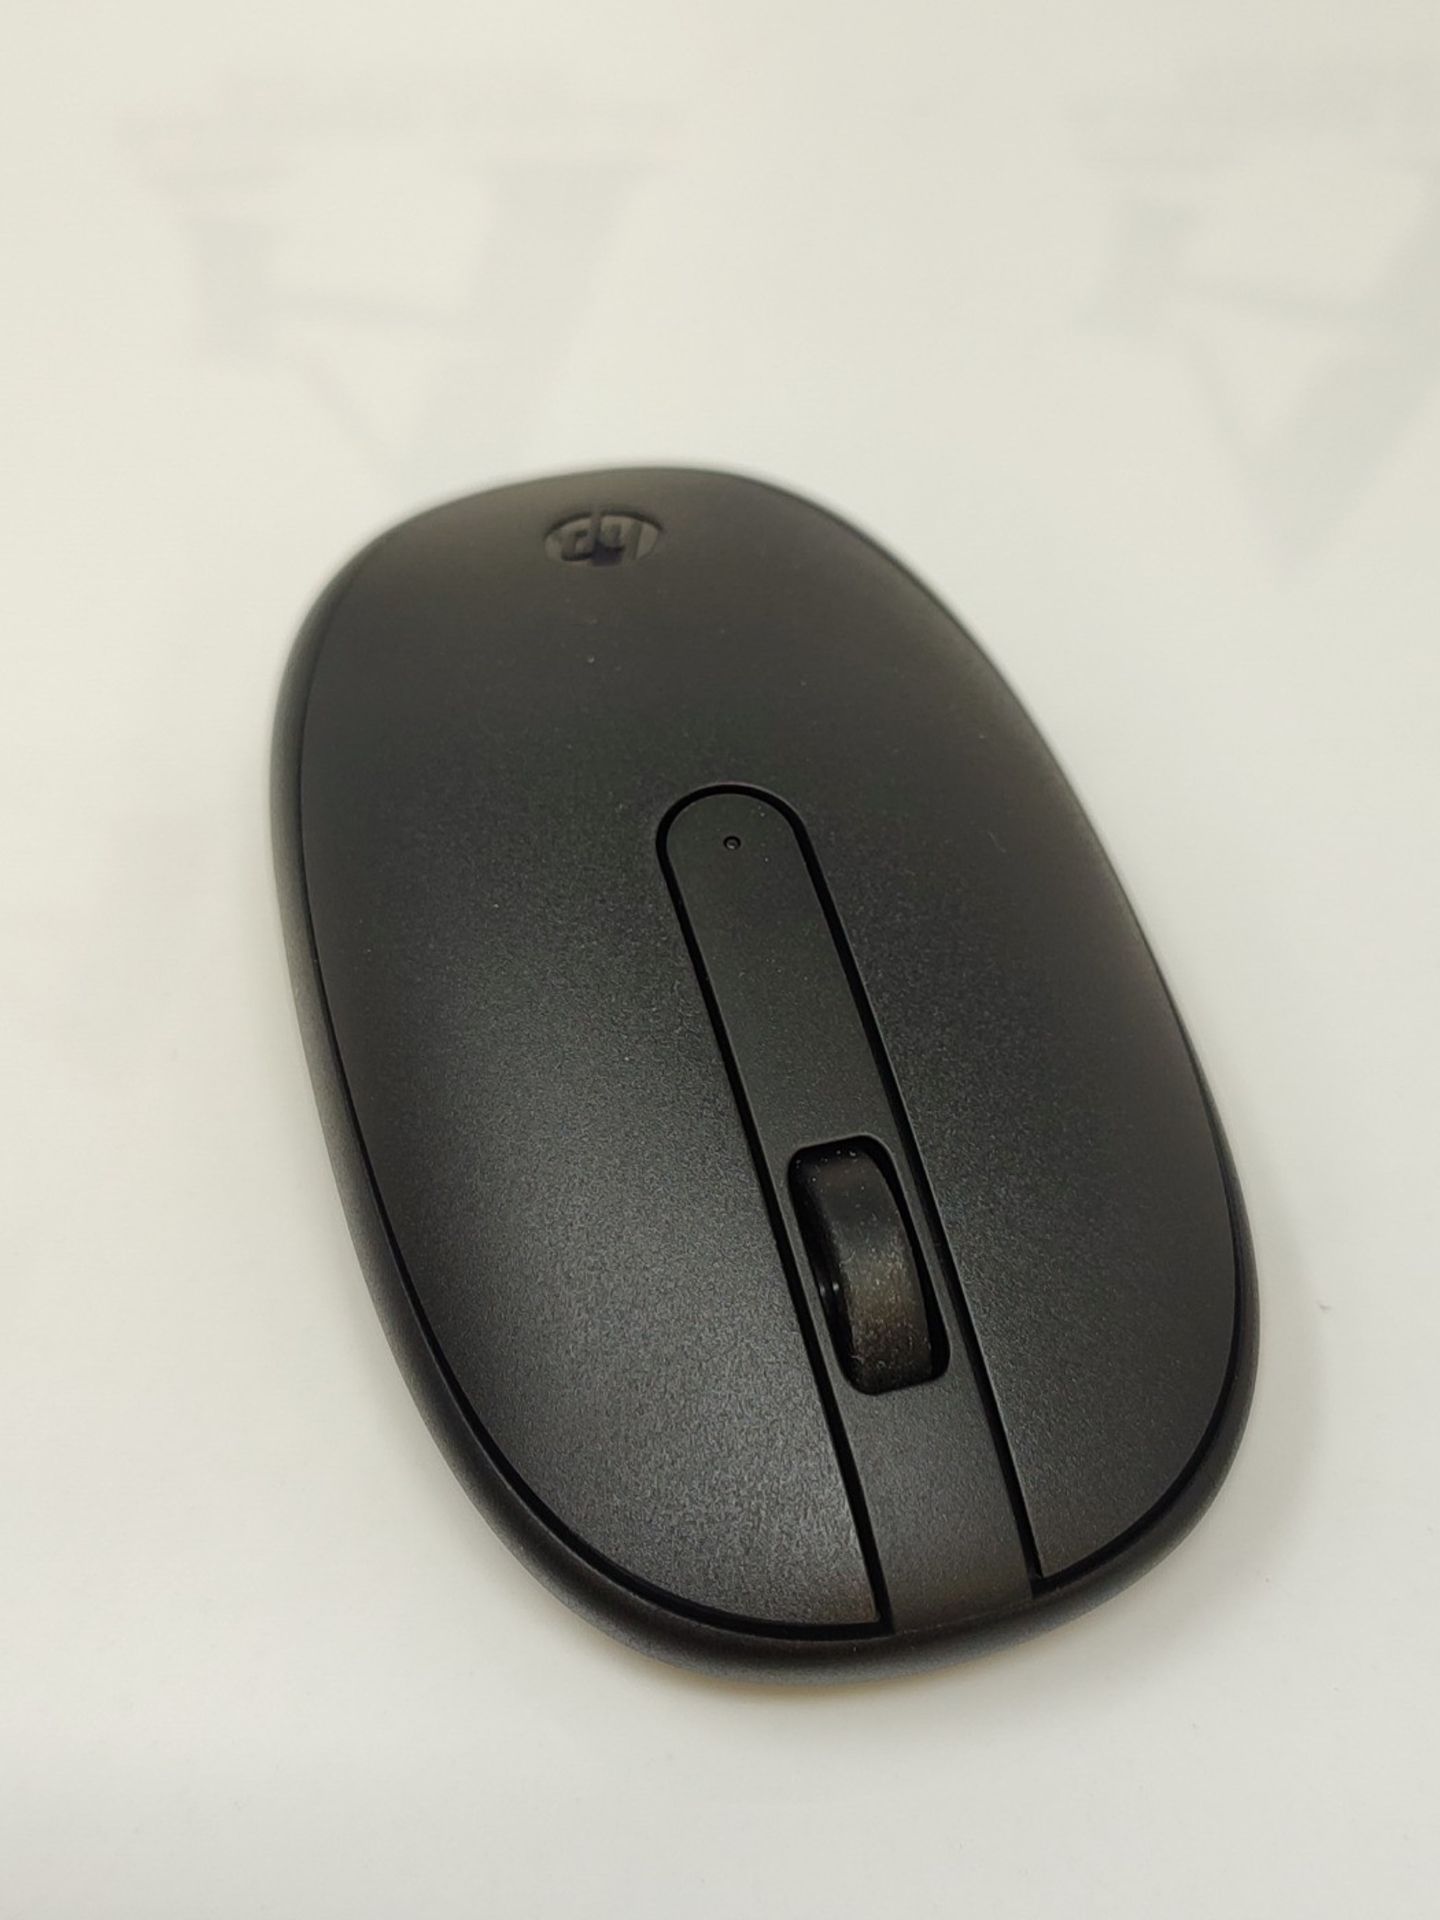 HP 240 Mouse Empire Wireless, 1600 DPI Optical Sensor, Bluetooth 5.1, 3 Buttons, Scrol - Image 3 of 3